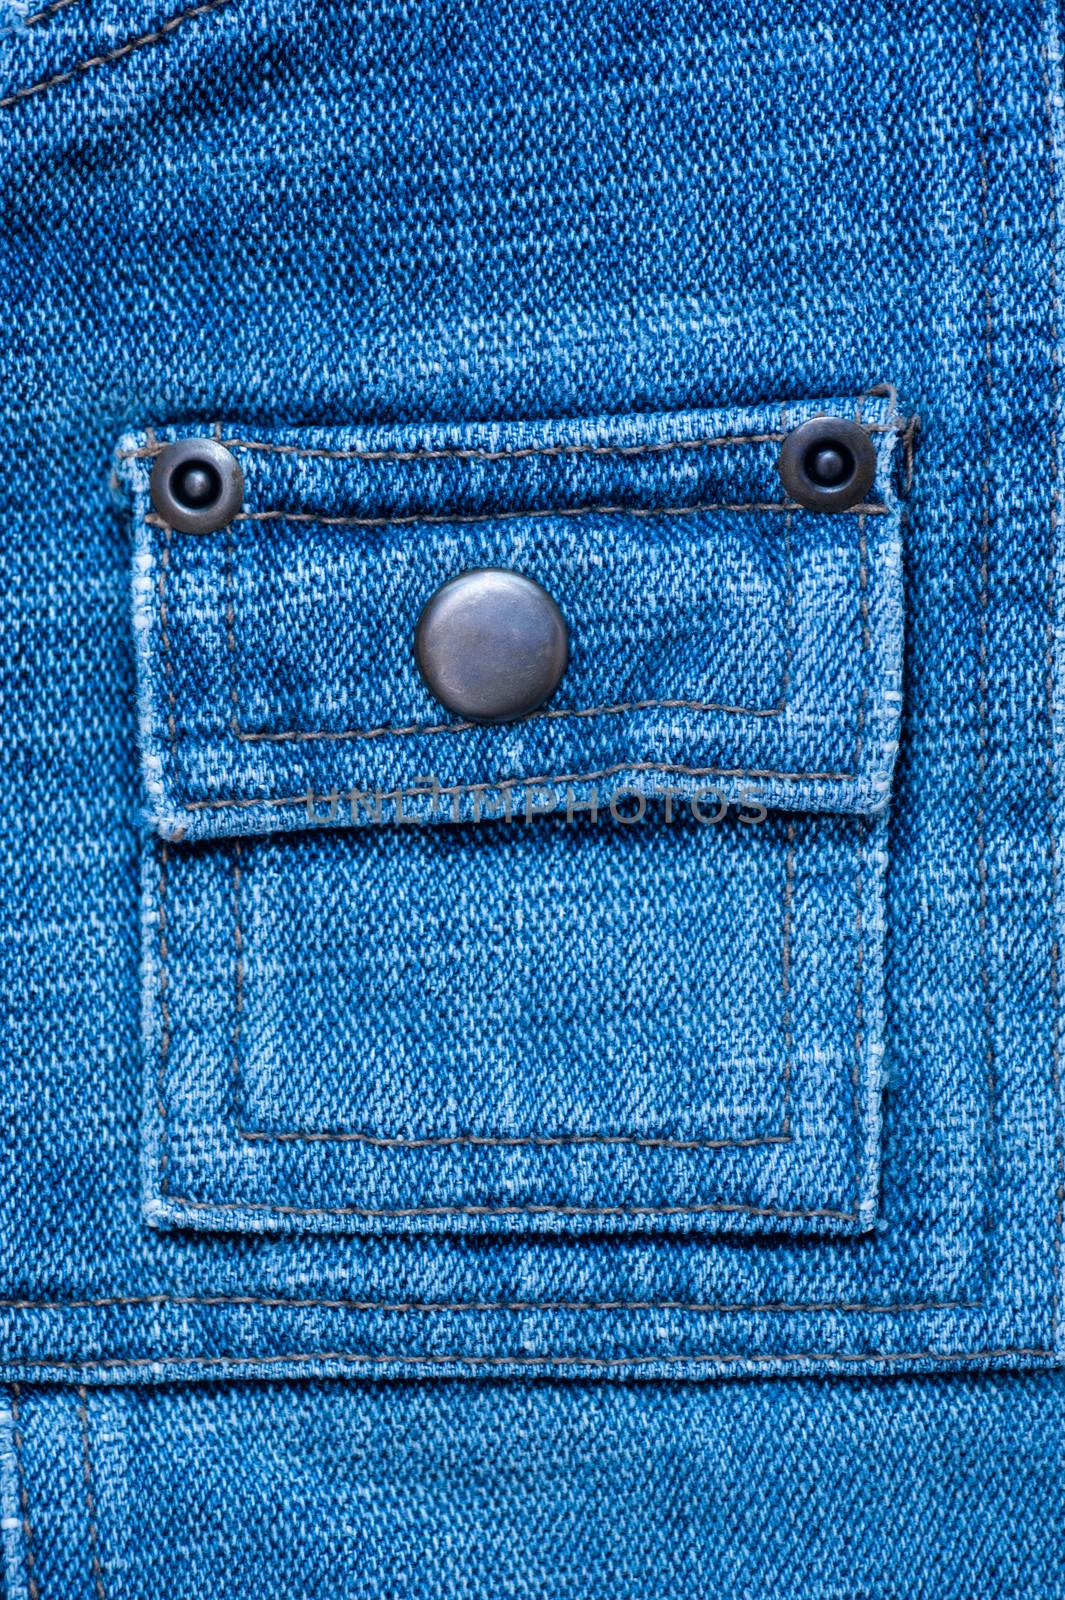 texture of denim with a pocket sewn in the middle thread